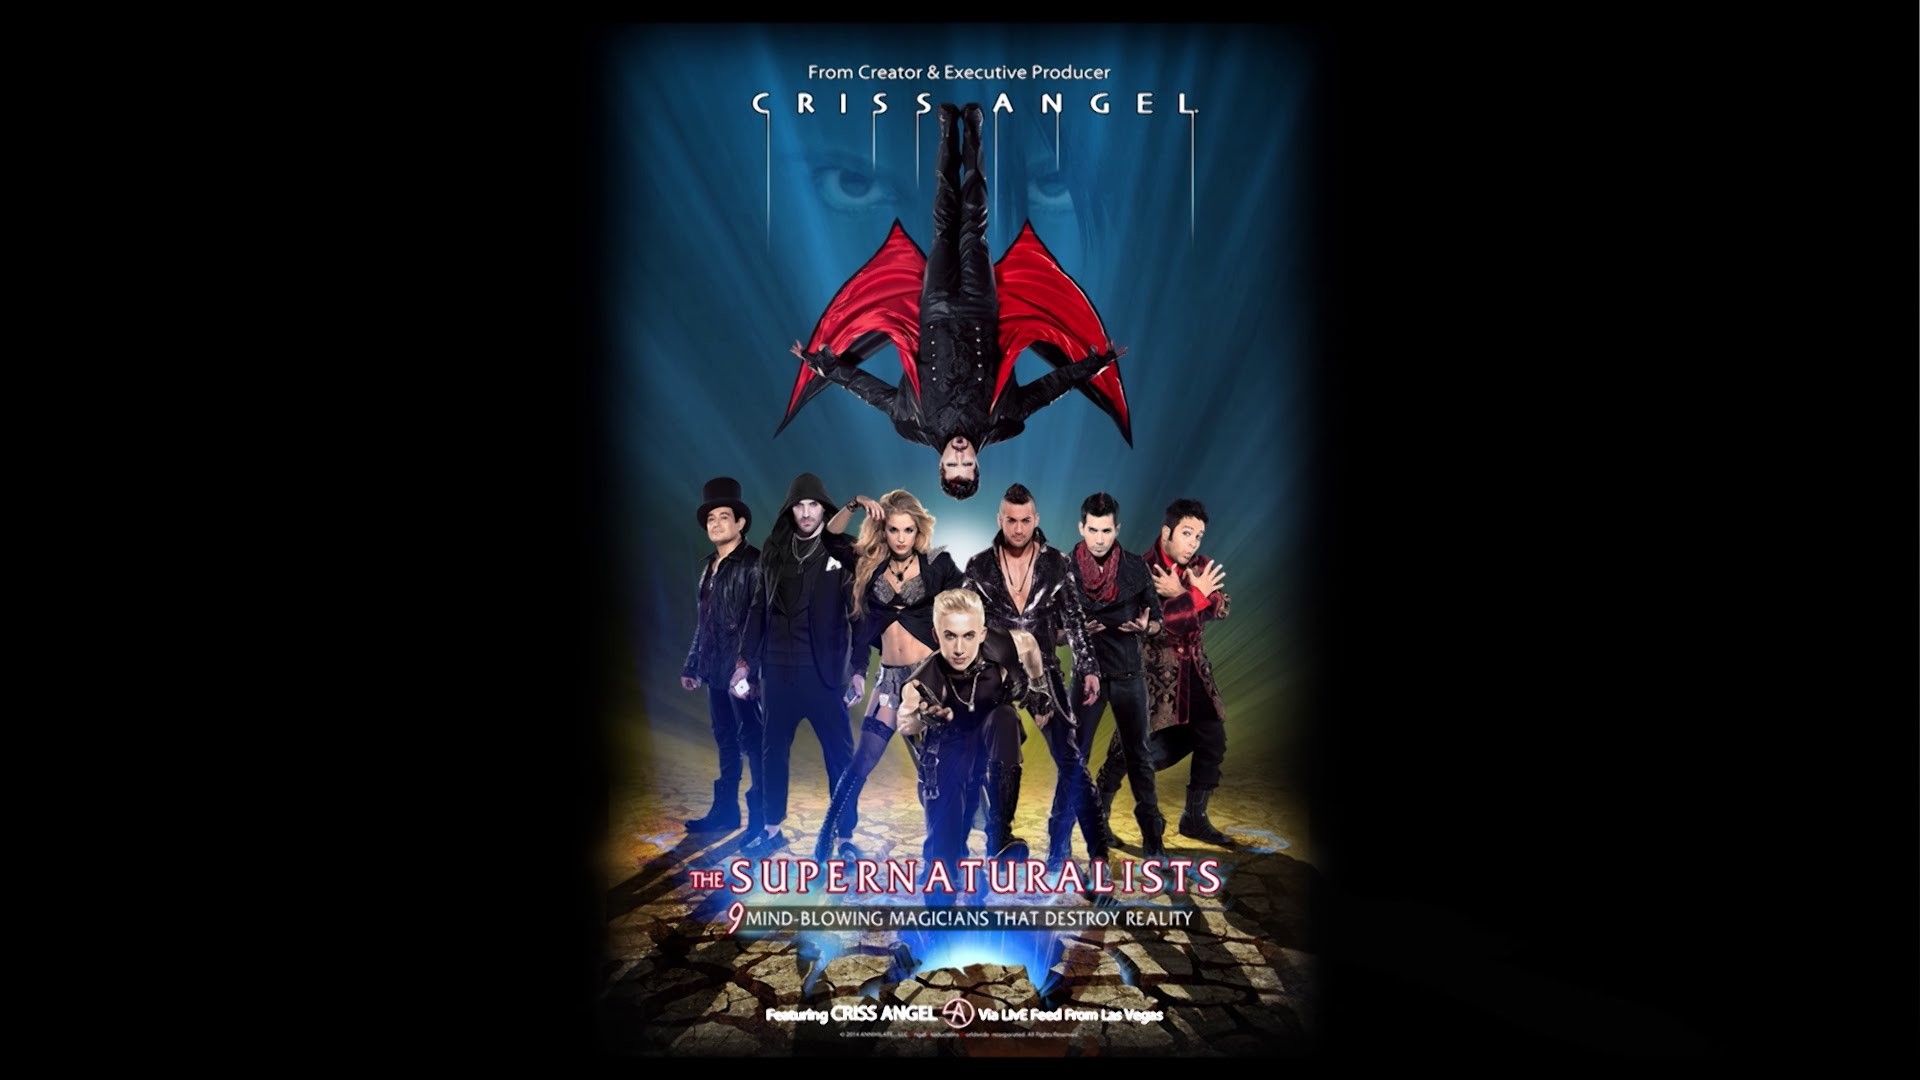 1920x1080 Criss Angel's The Supernaturalists coming to Foxwoods